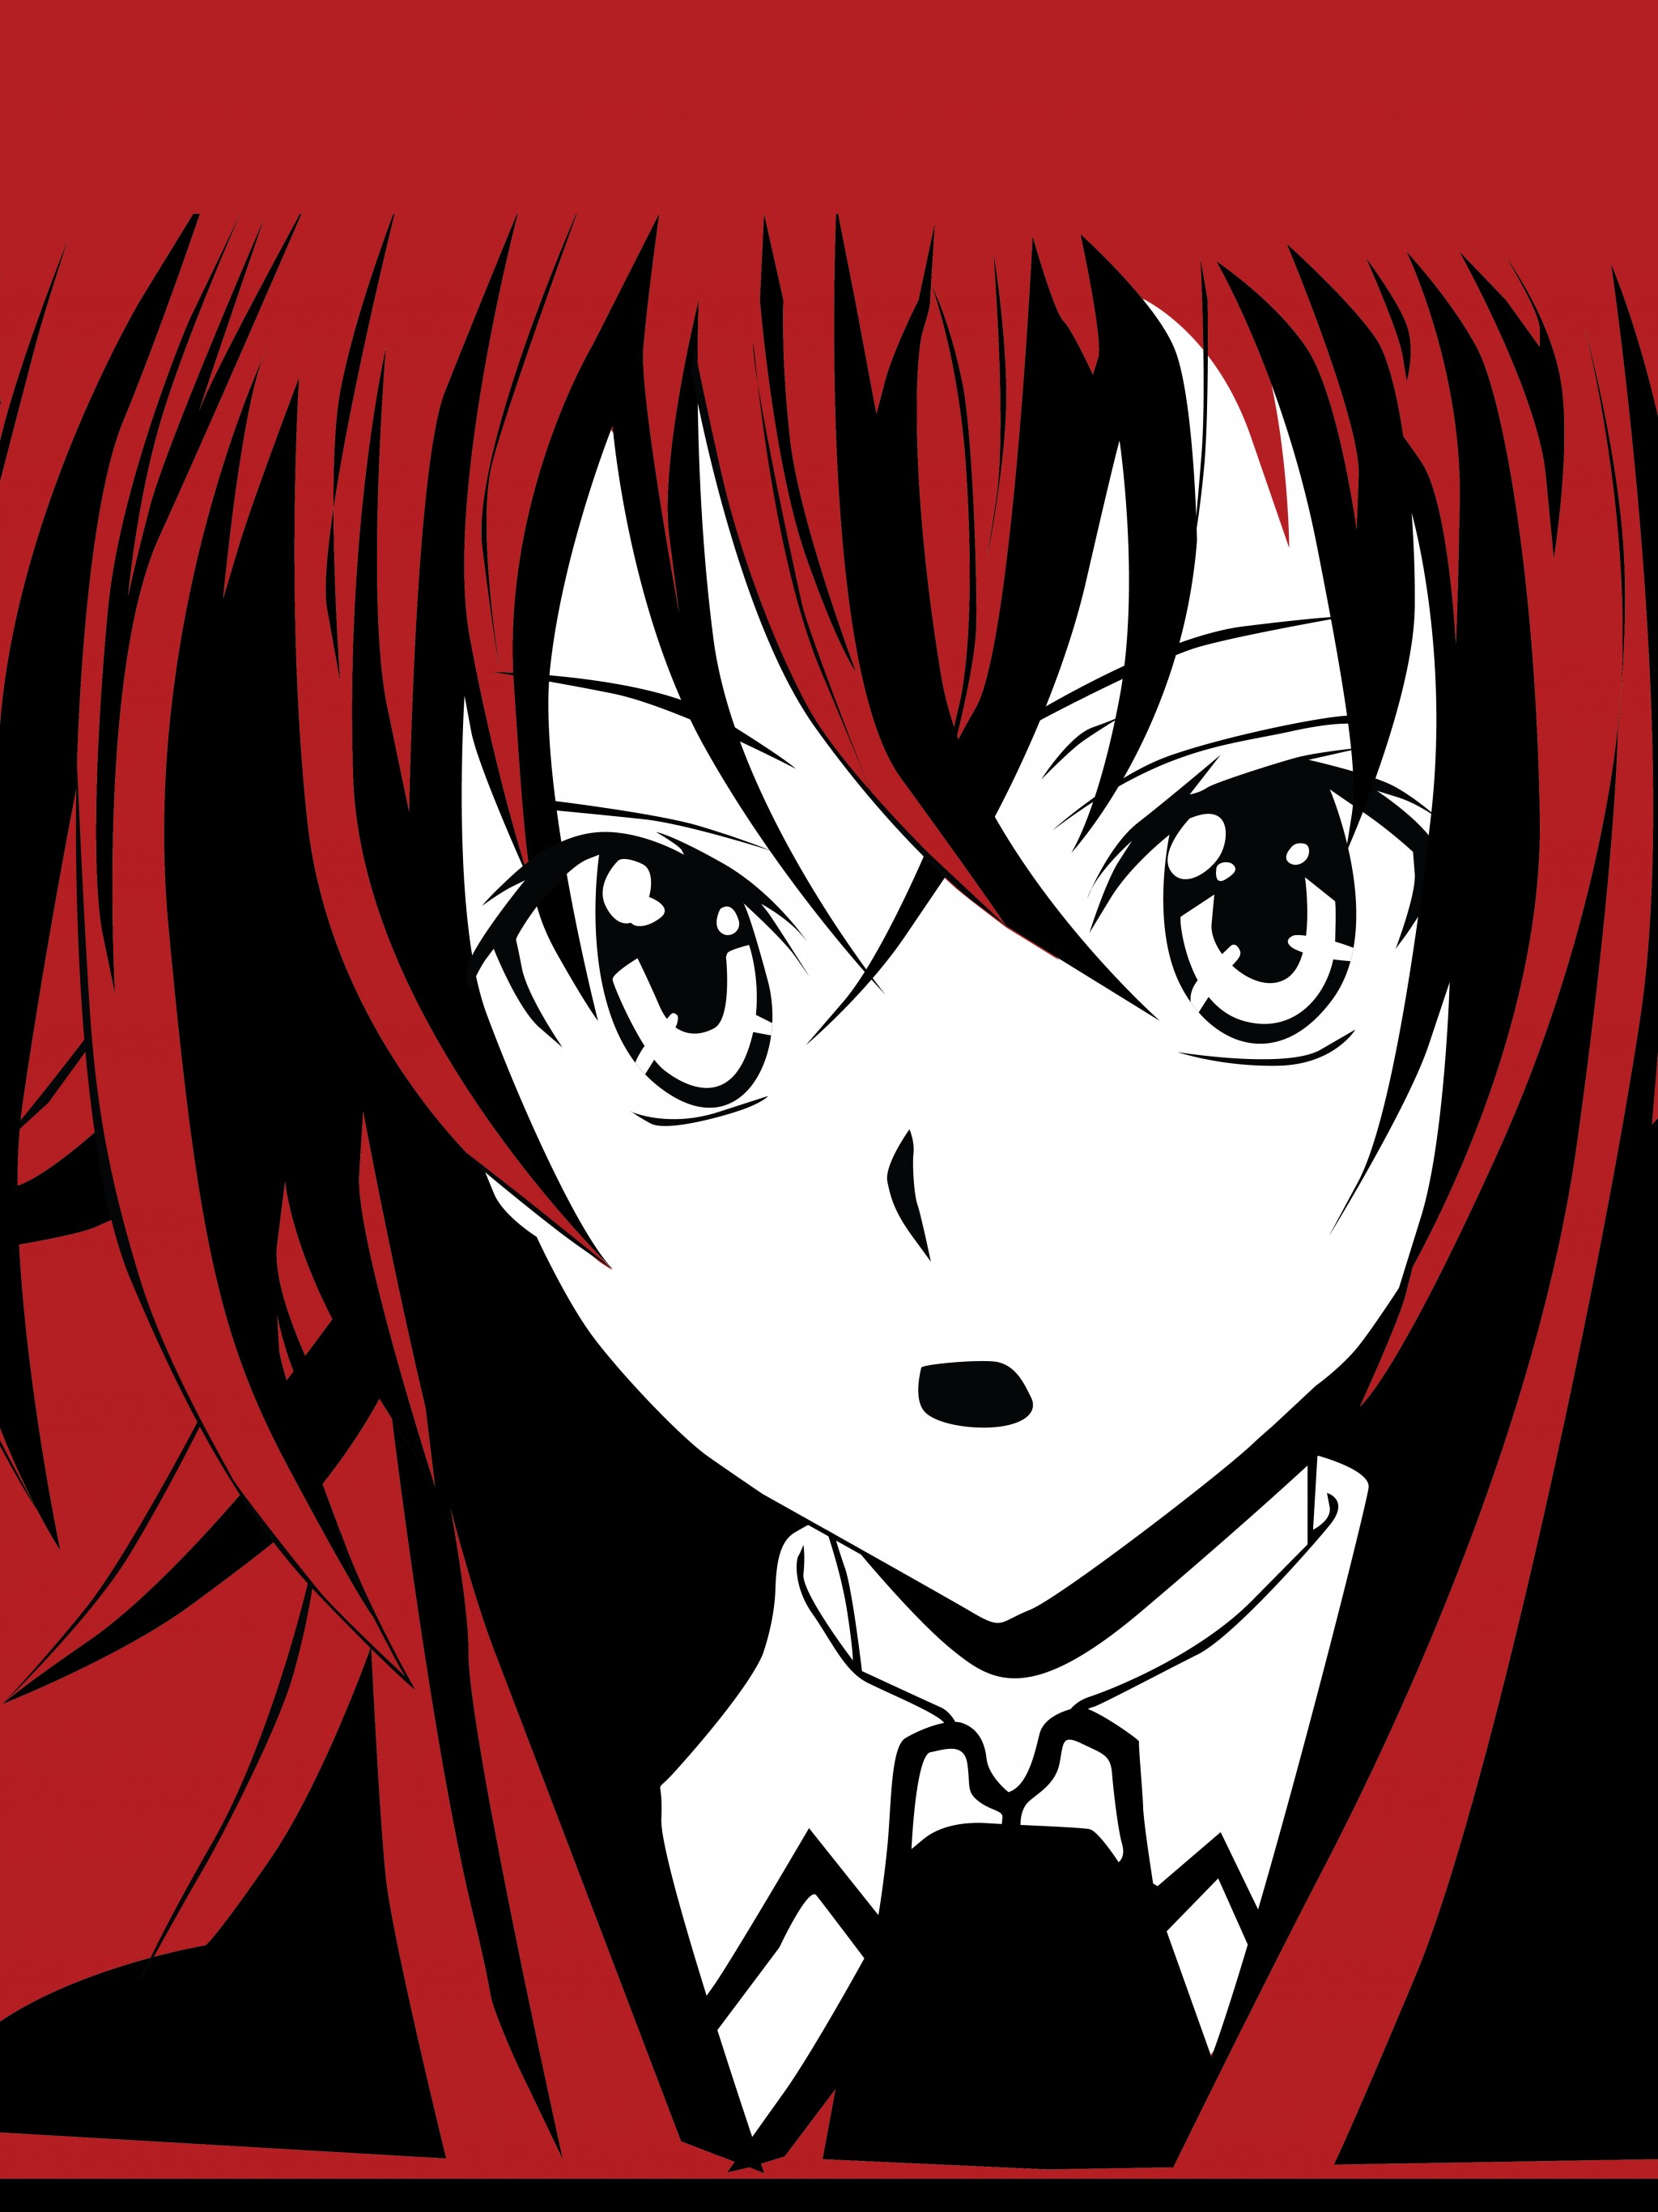 Download Wallpaper Rias Gremory Linkedin Rias Gremory - Rias Gremory Wallpaper Full Hd , HD Wallpaper & Backgrounds